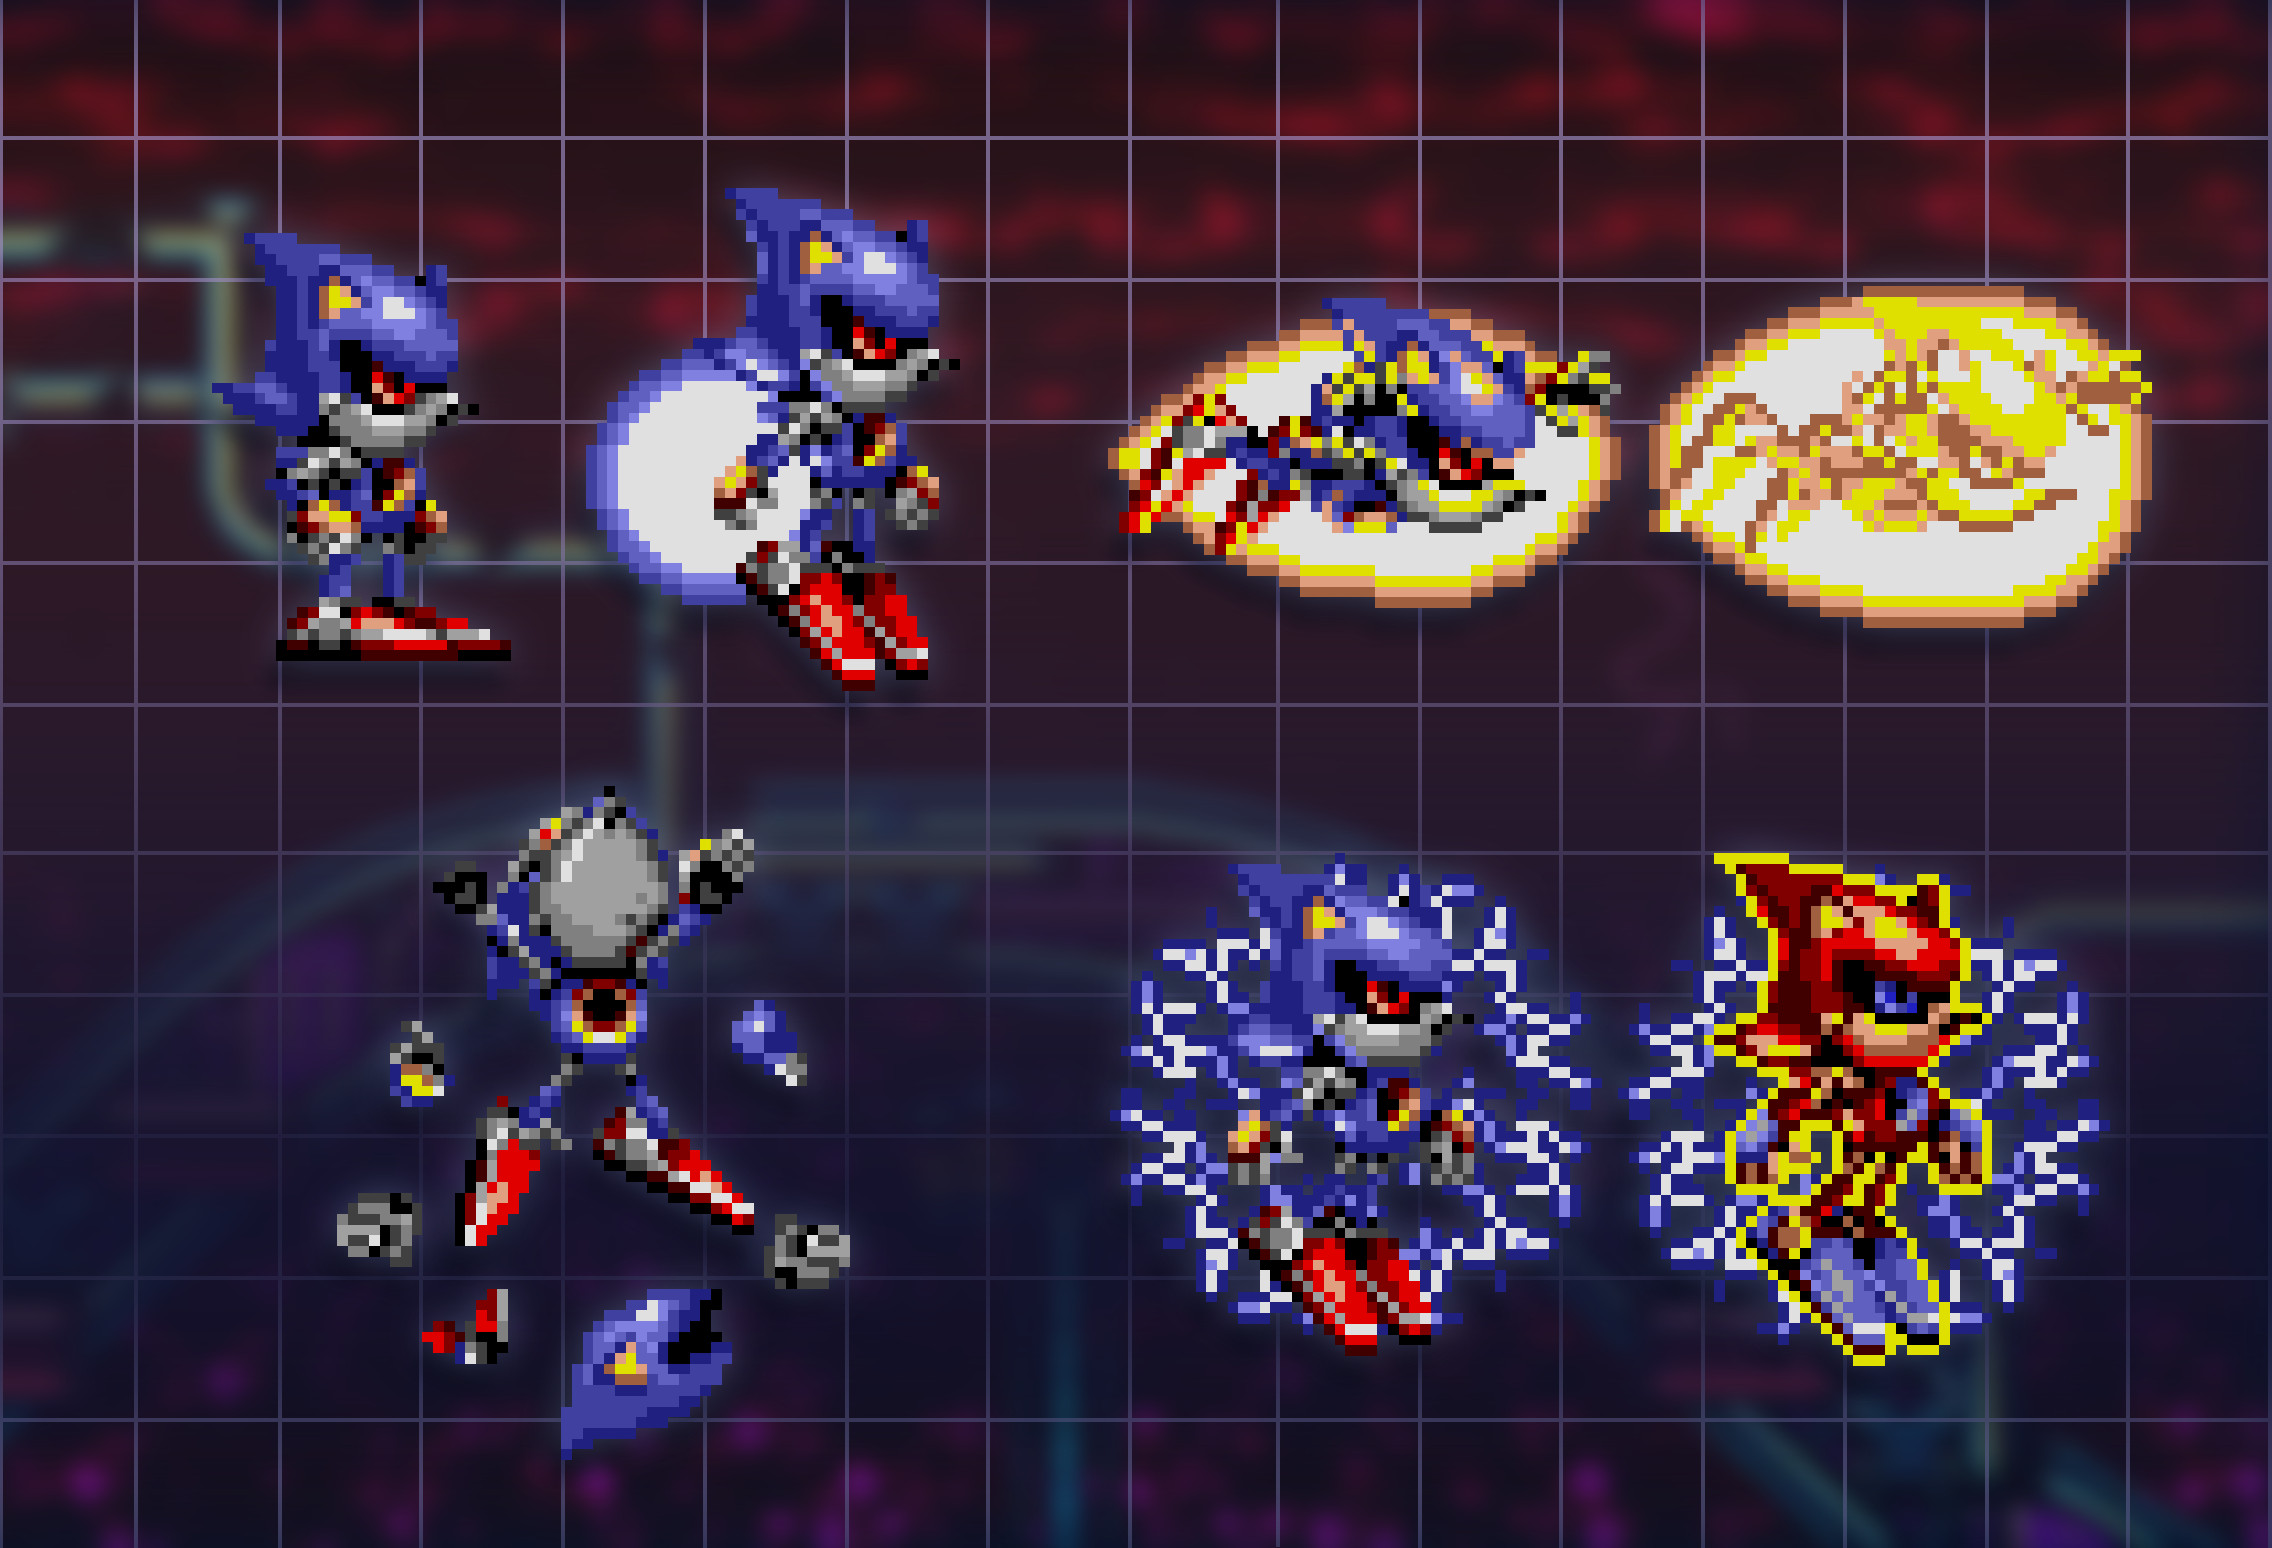 CE+ Styled Metal Sonic [Sonic CD (2011)] [Mods]